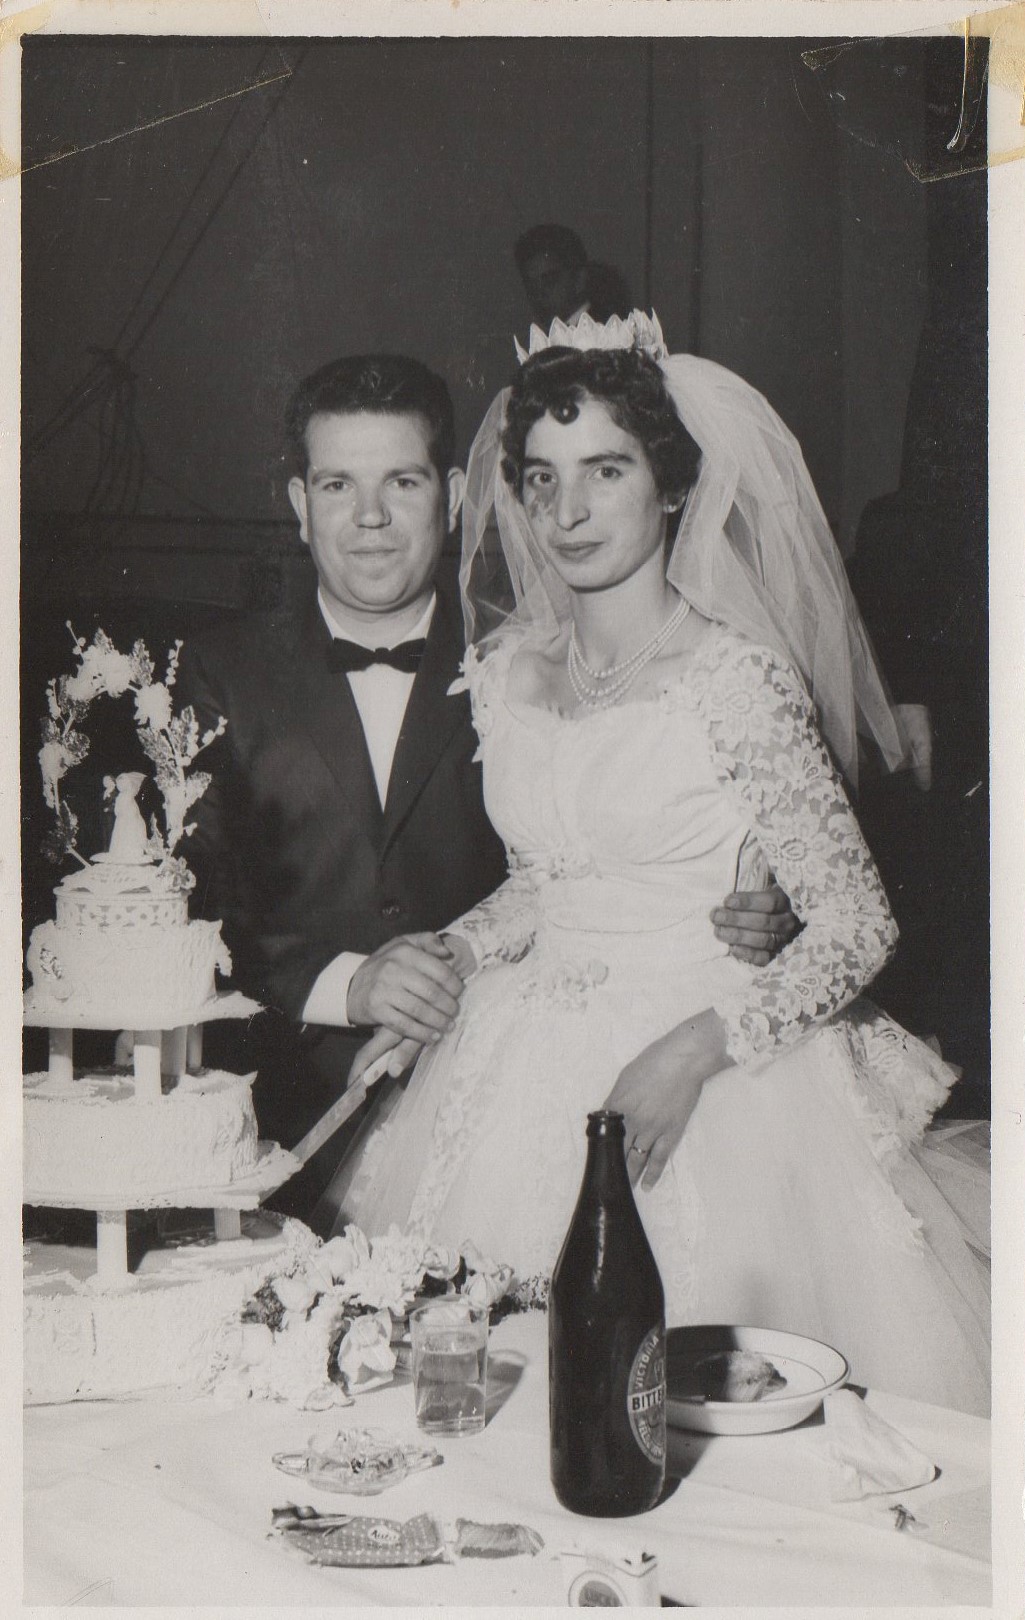 From their wedding - April 15, 1961.